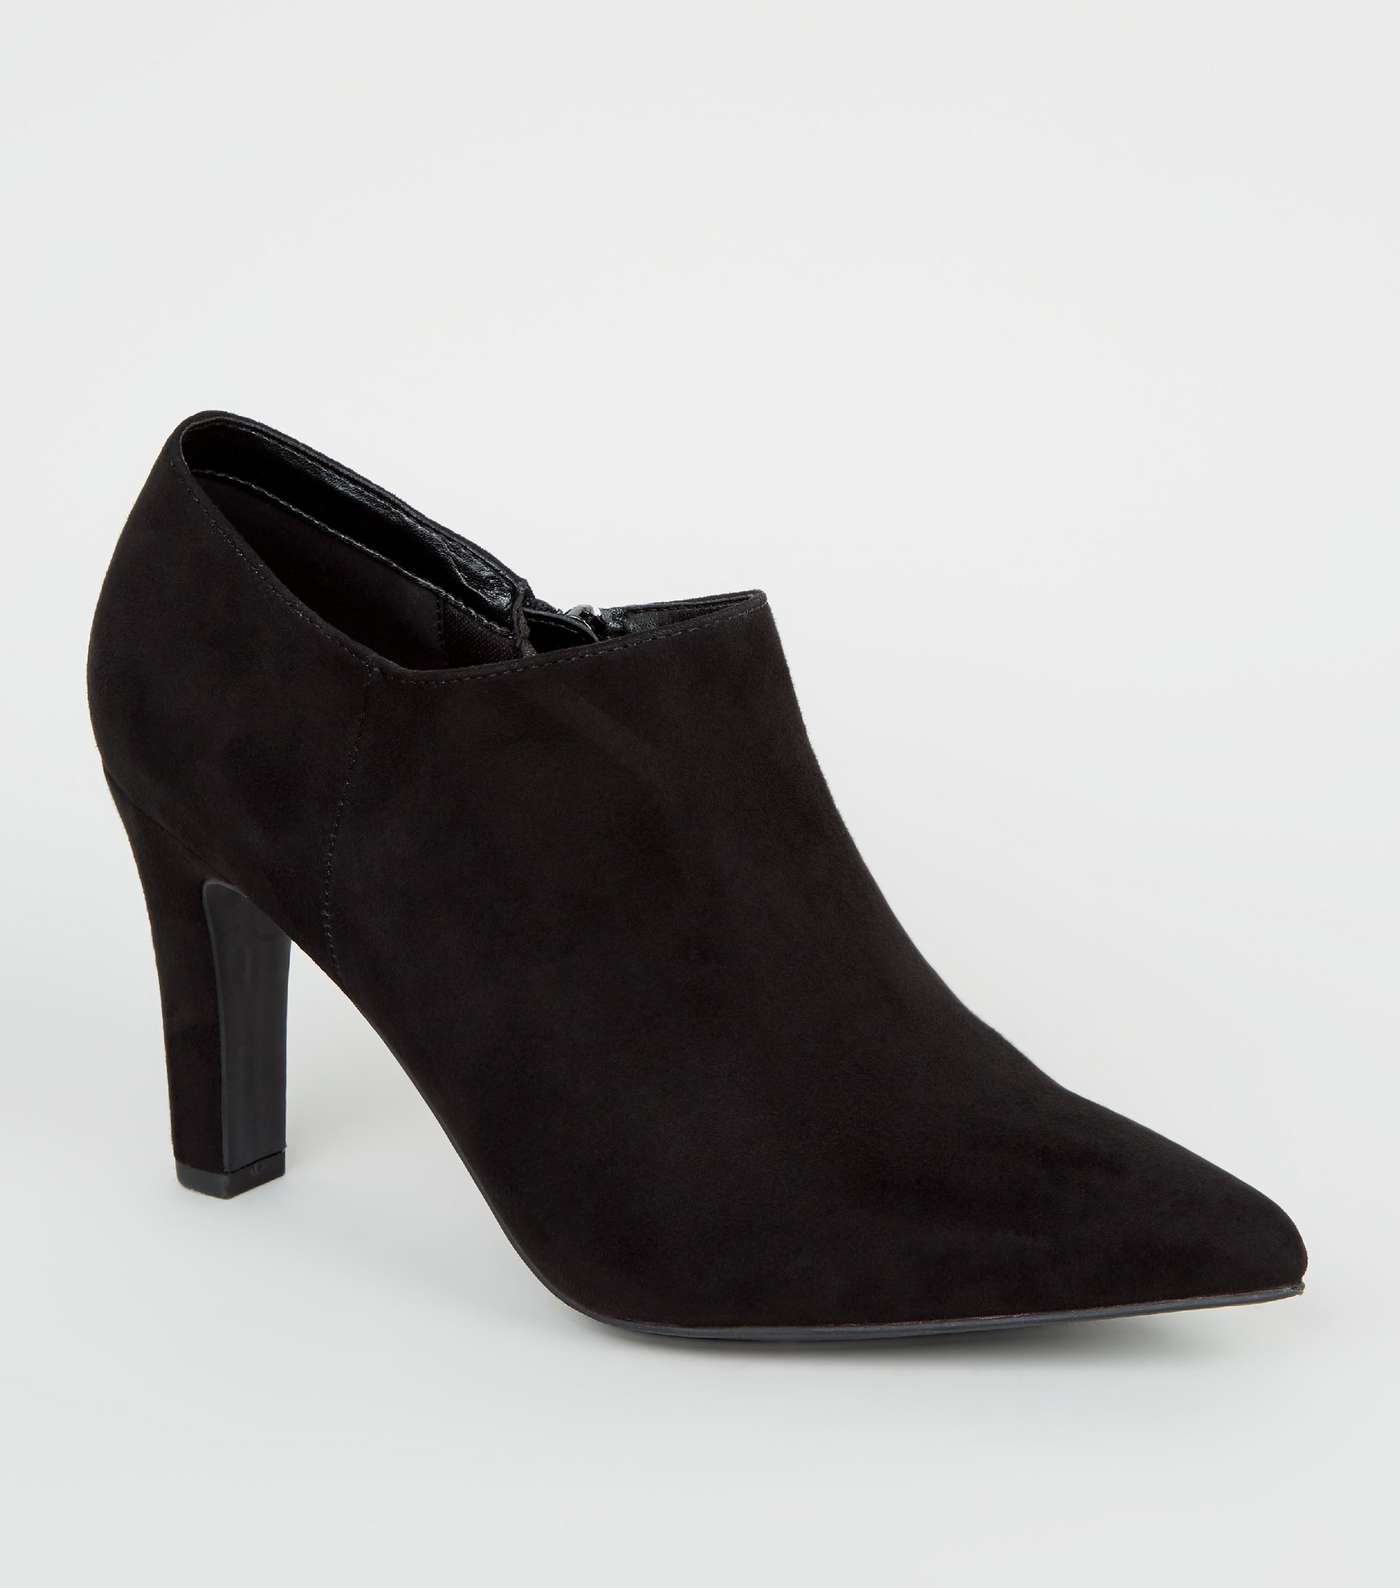 Black Suedette Pointed Toe Heeled Shoe Boots